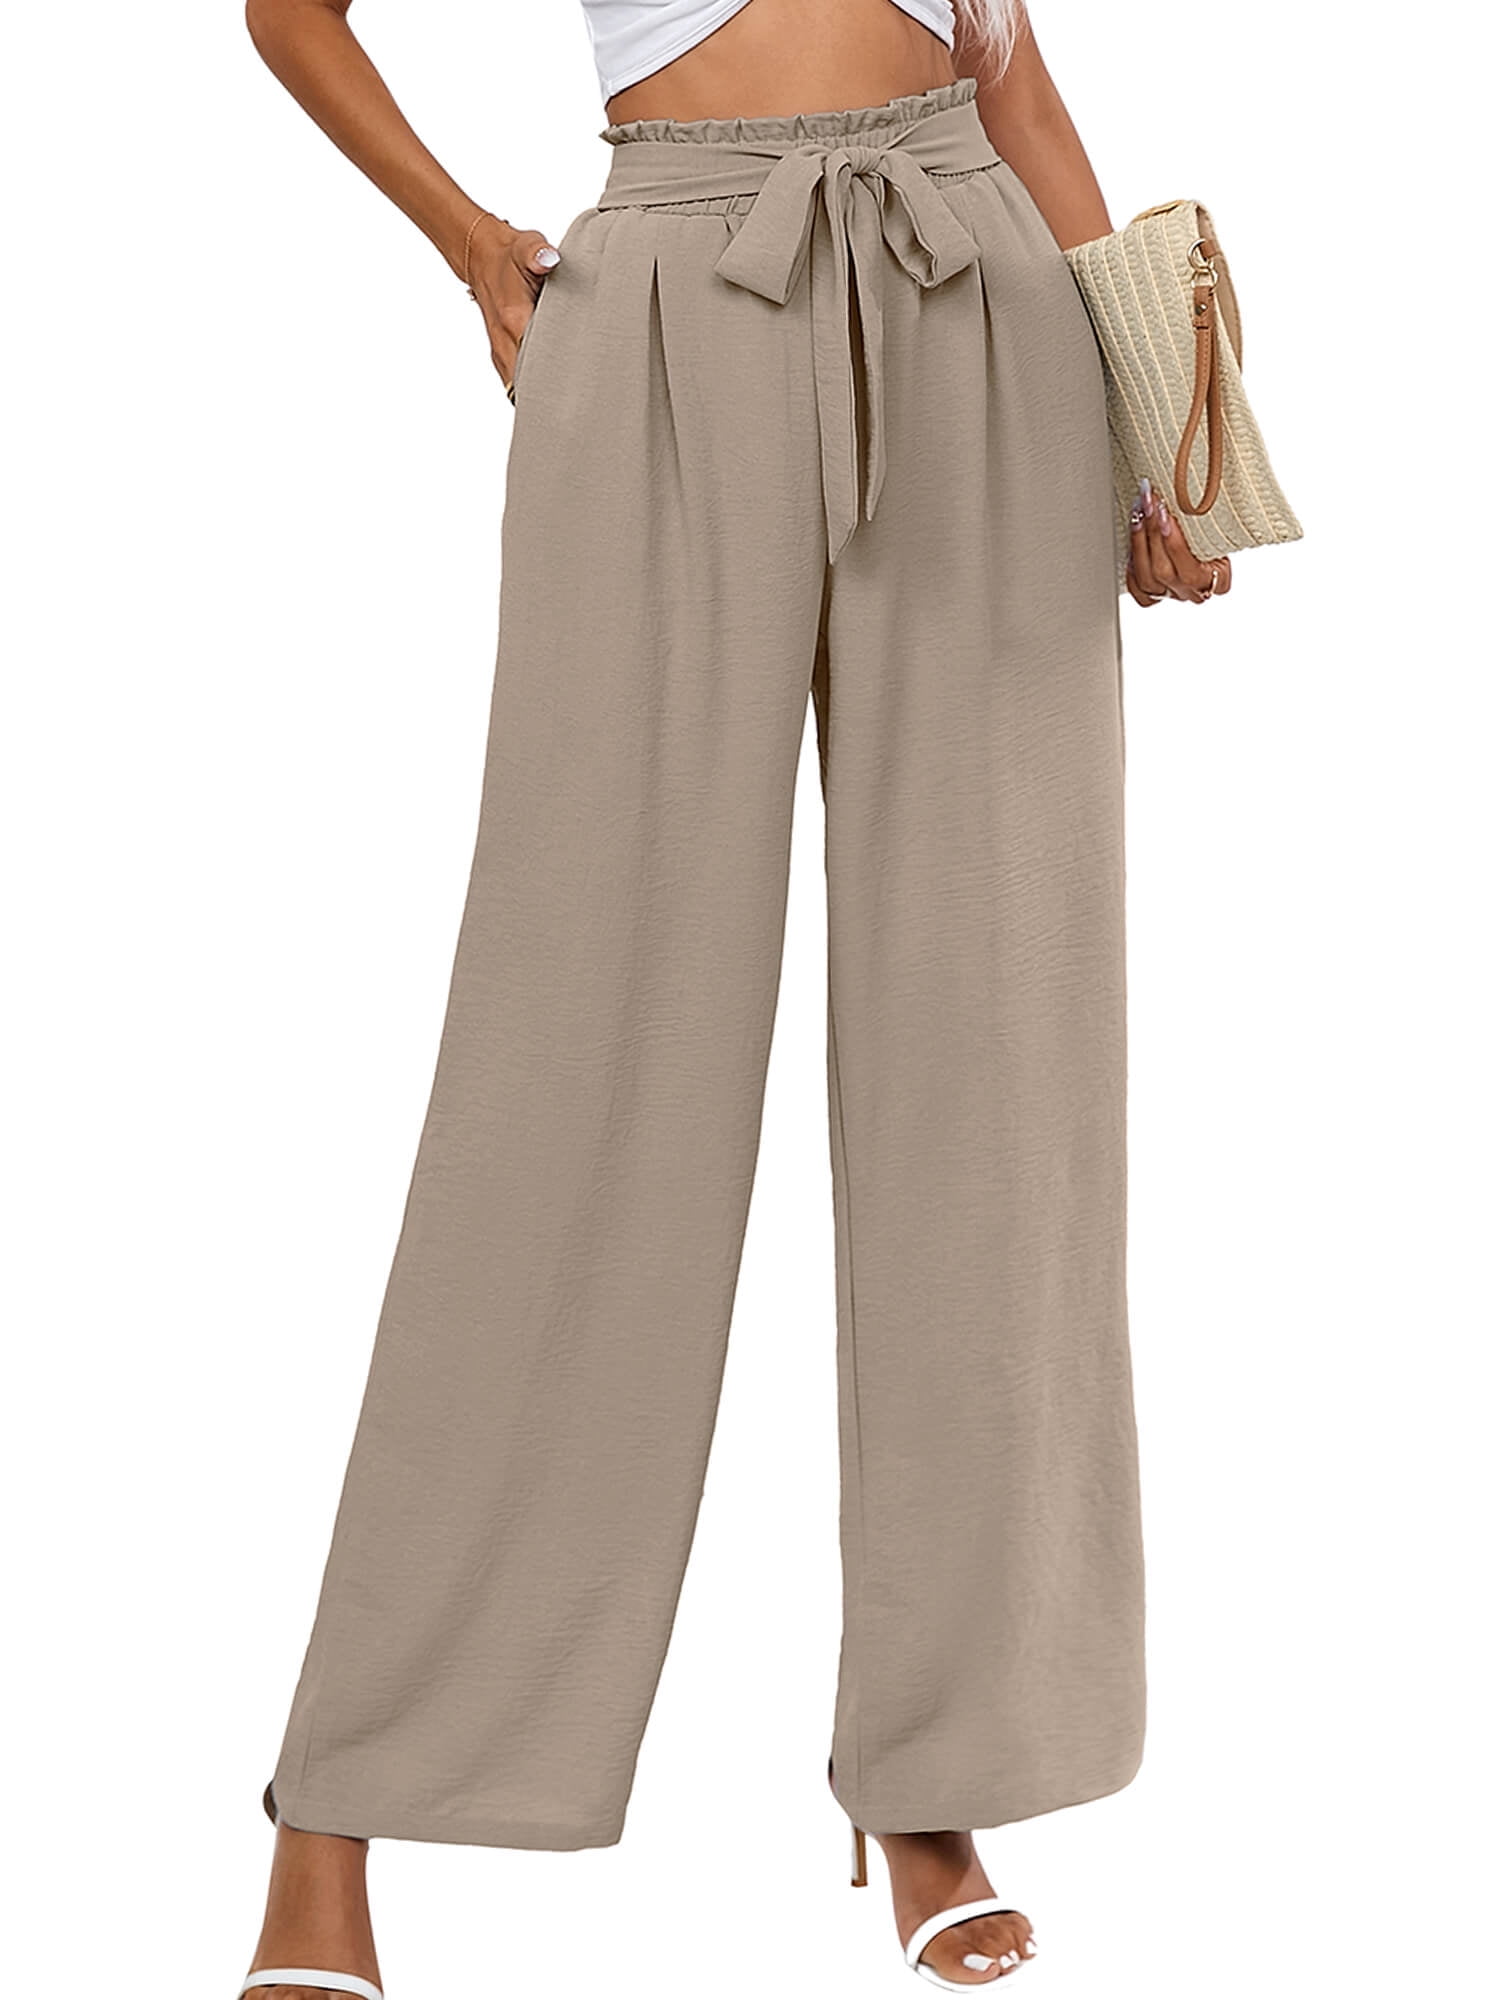 Chiclily Women's Wide Leg Lounge Pants with Pockets Lightweight High  Waisted Adjustable Tie Knot Loose Trousers, US Size Medium in Wheat